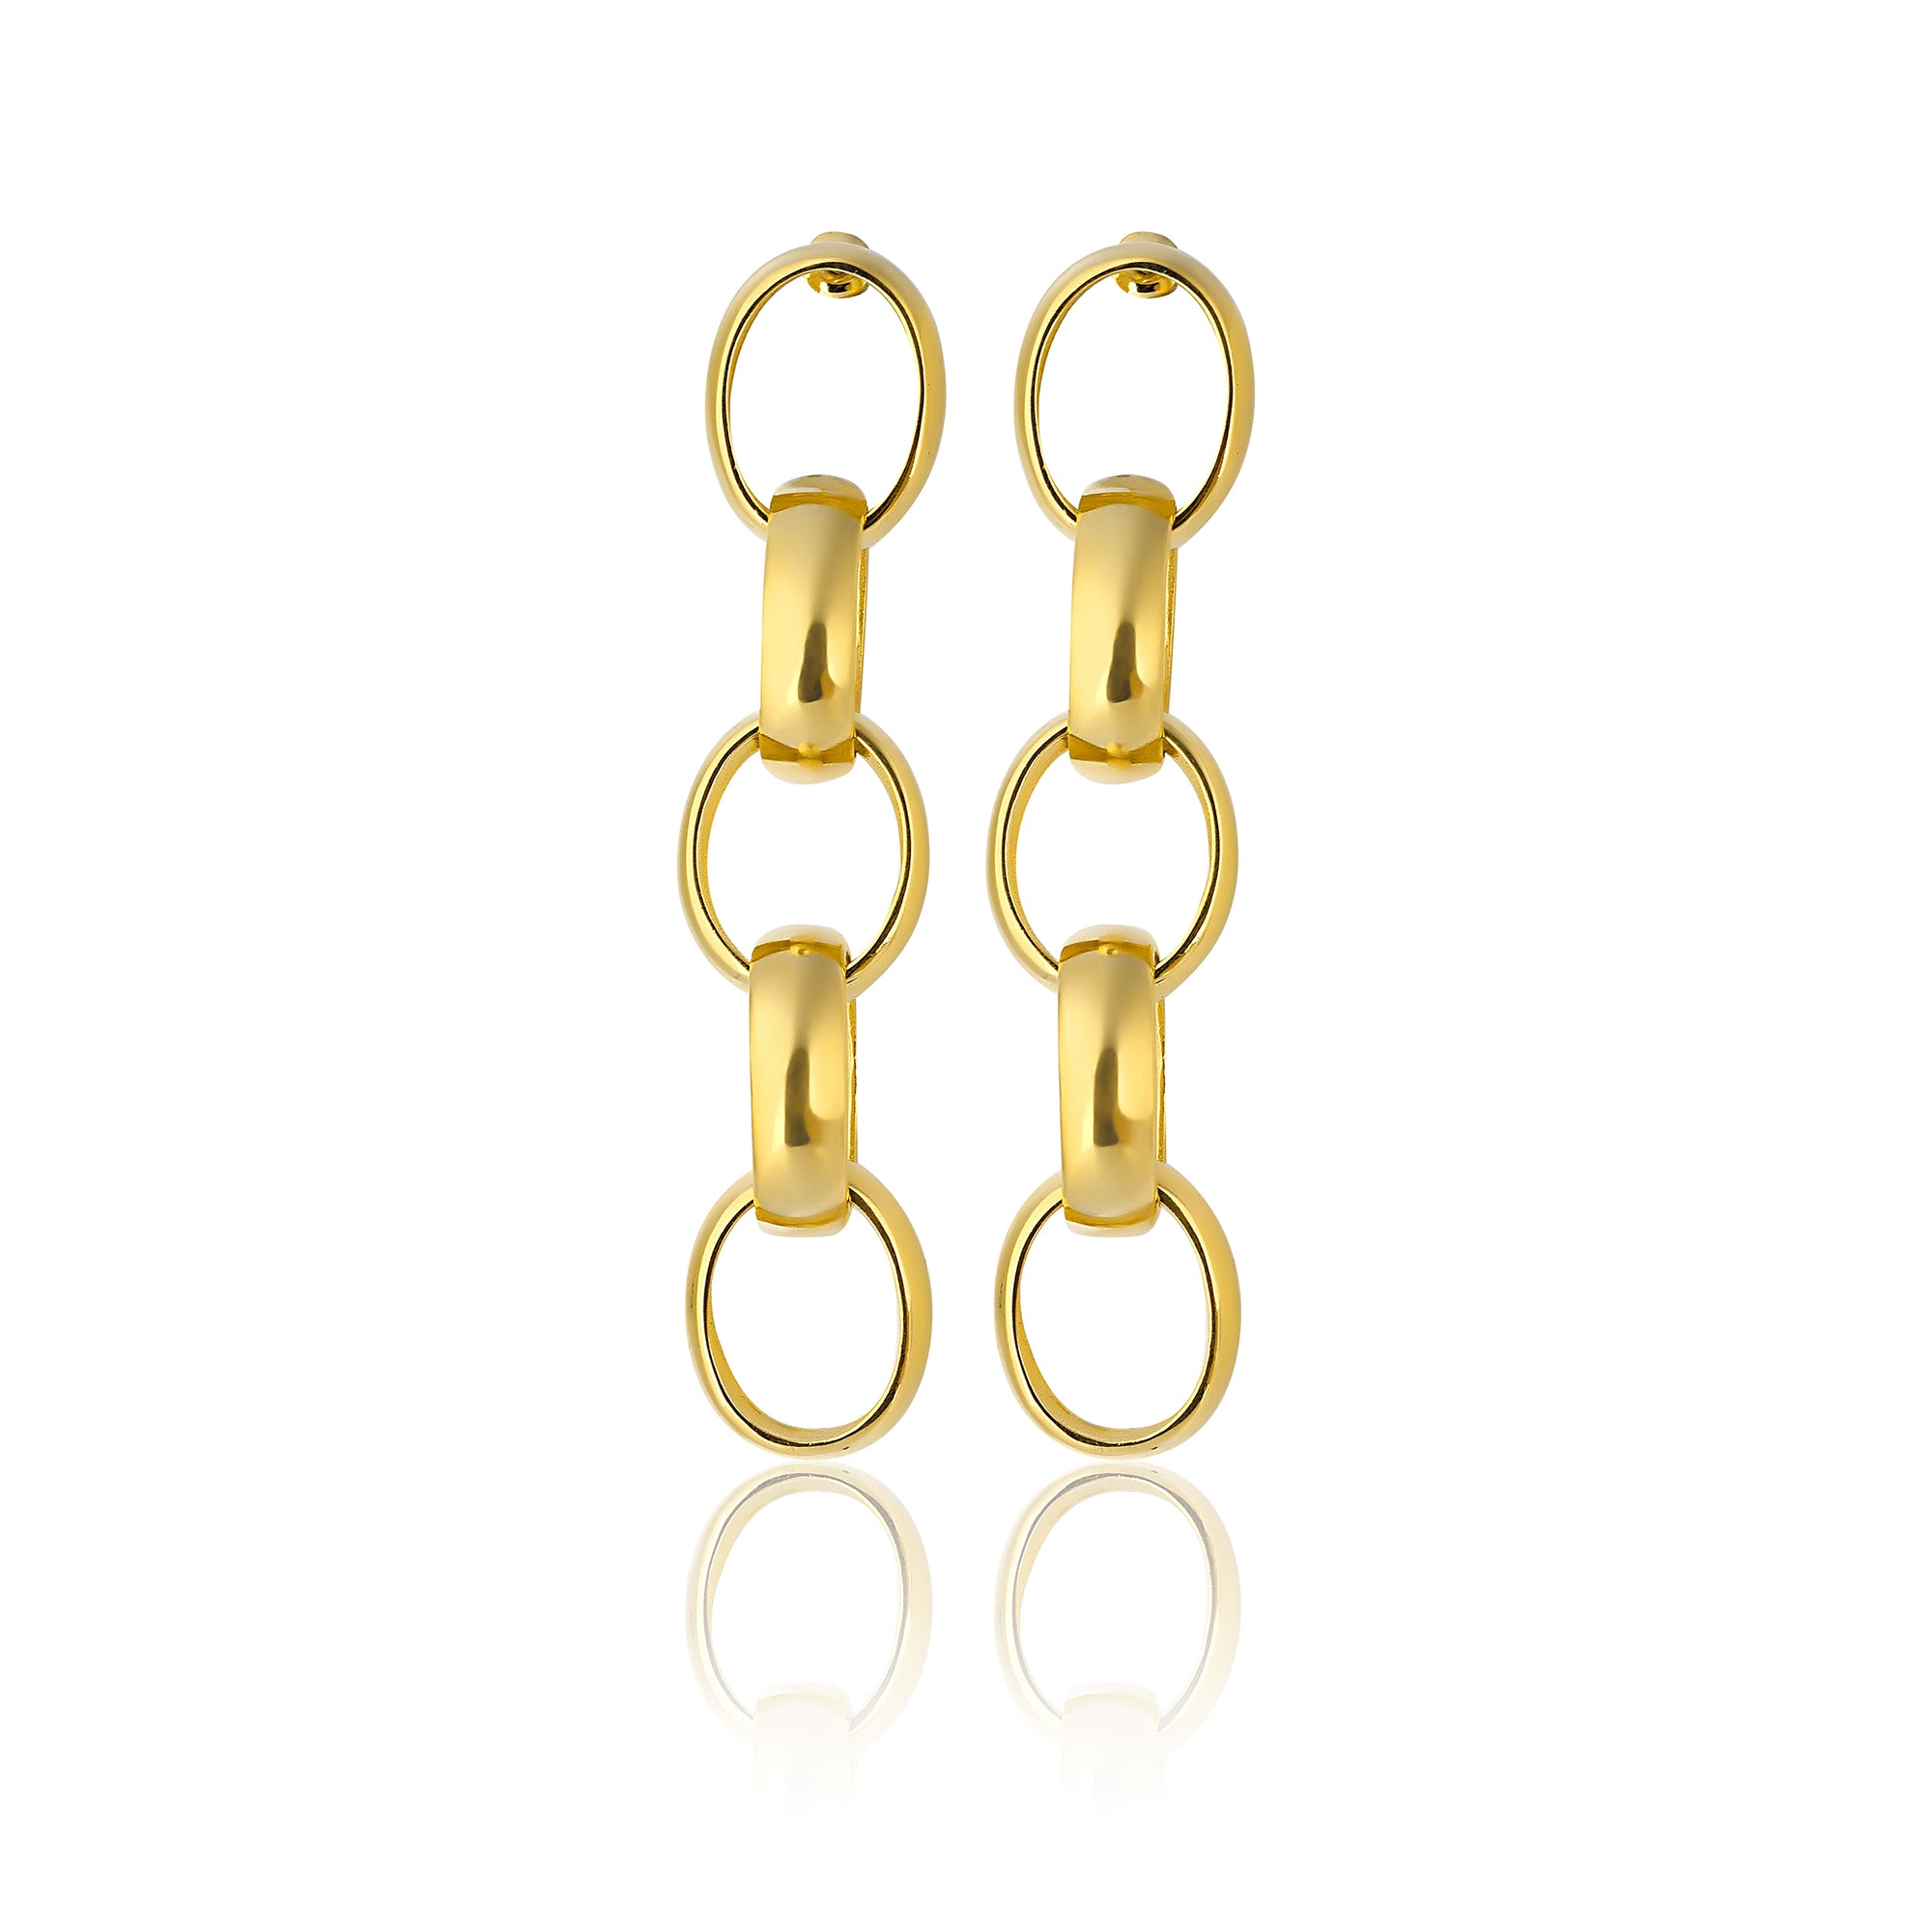 24K gold plated chain earrings statement jewelry